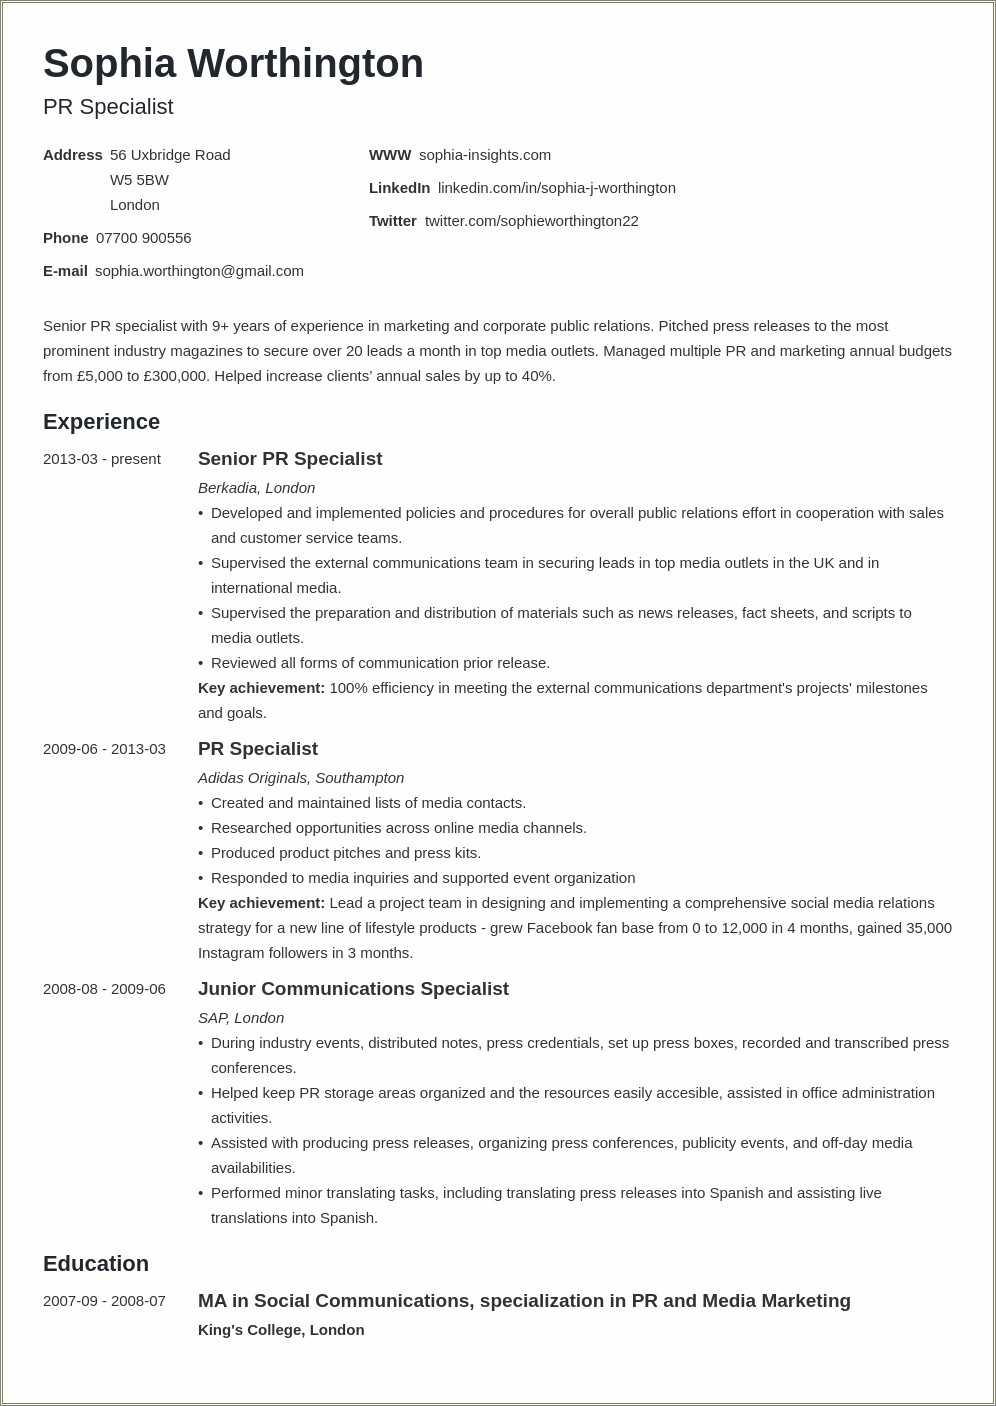 Personal Information In Resume Sample - Resume Example Gallery